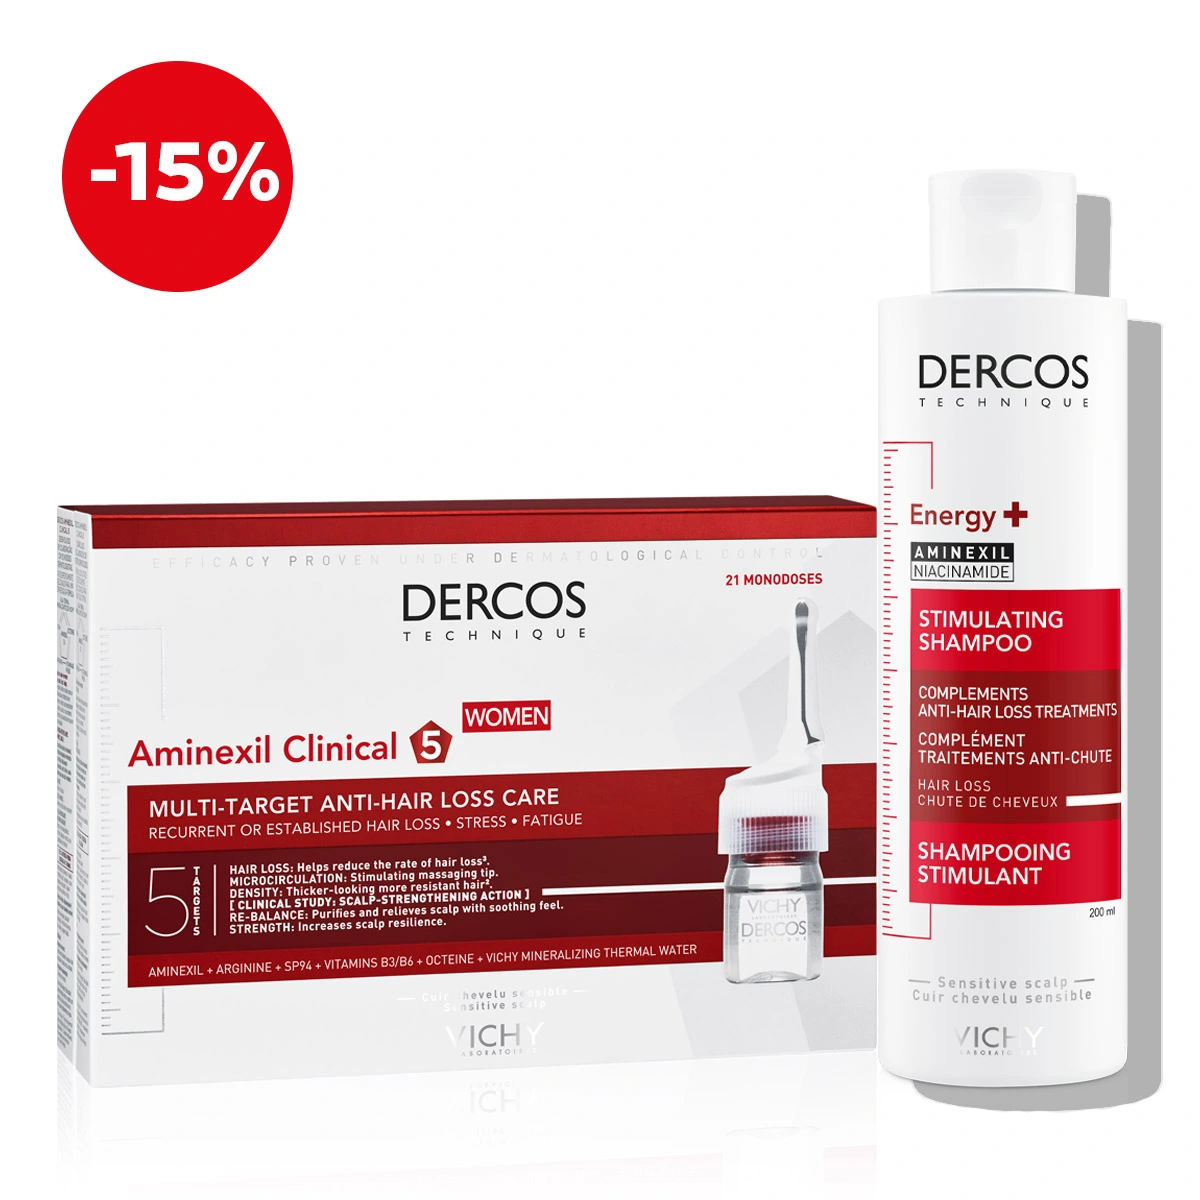 Vichy DERCOS Protocol against hair loss (shampoo and ampoules) (1)